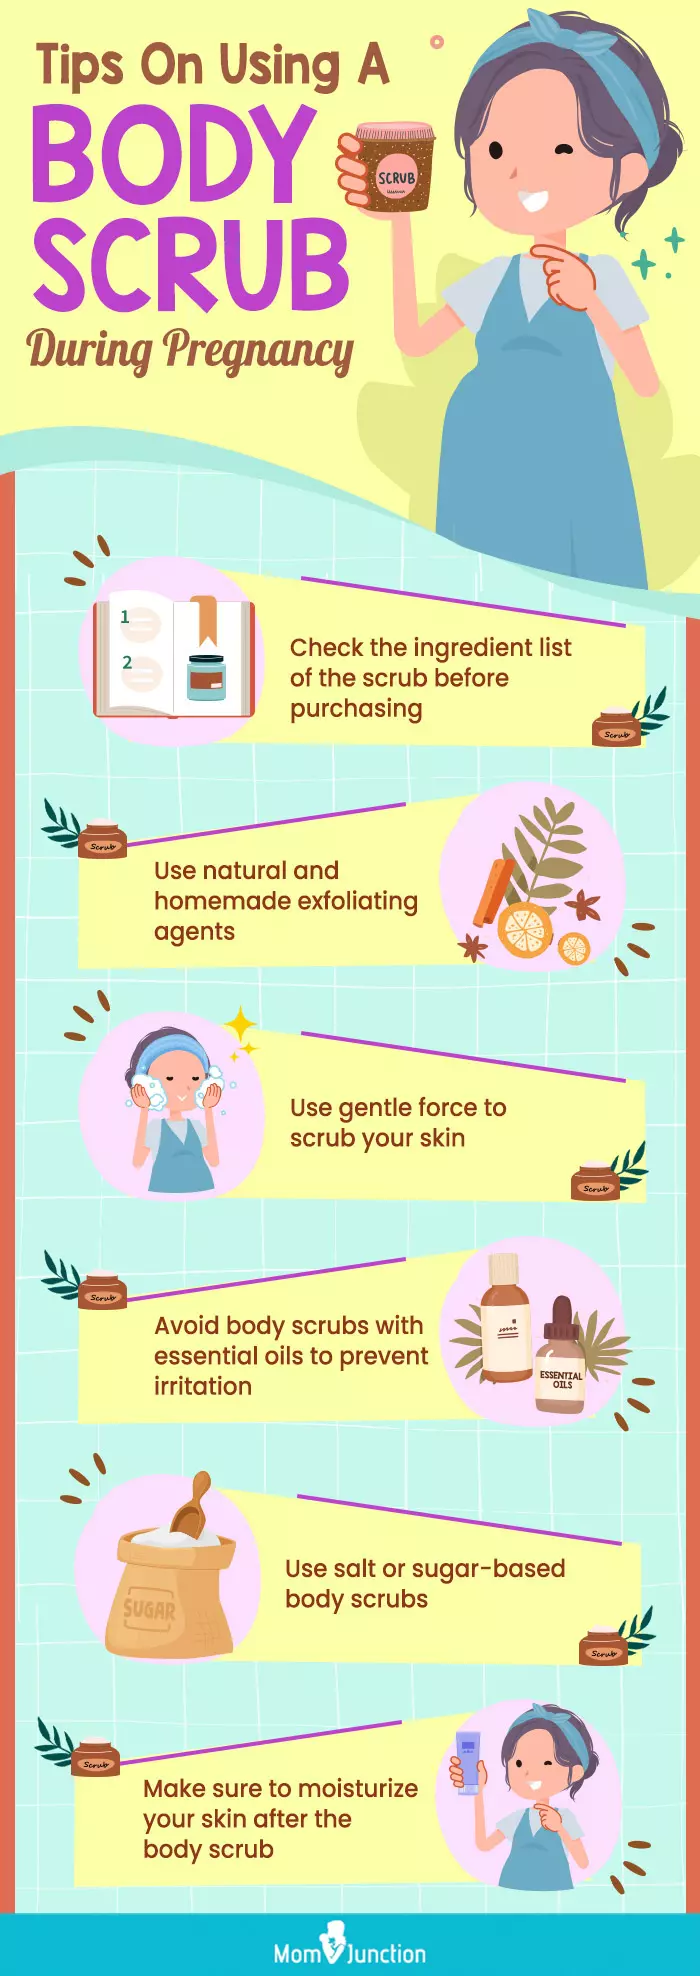 tips on using a body scrub during pregnancy (infographic)